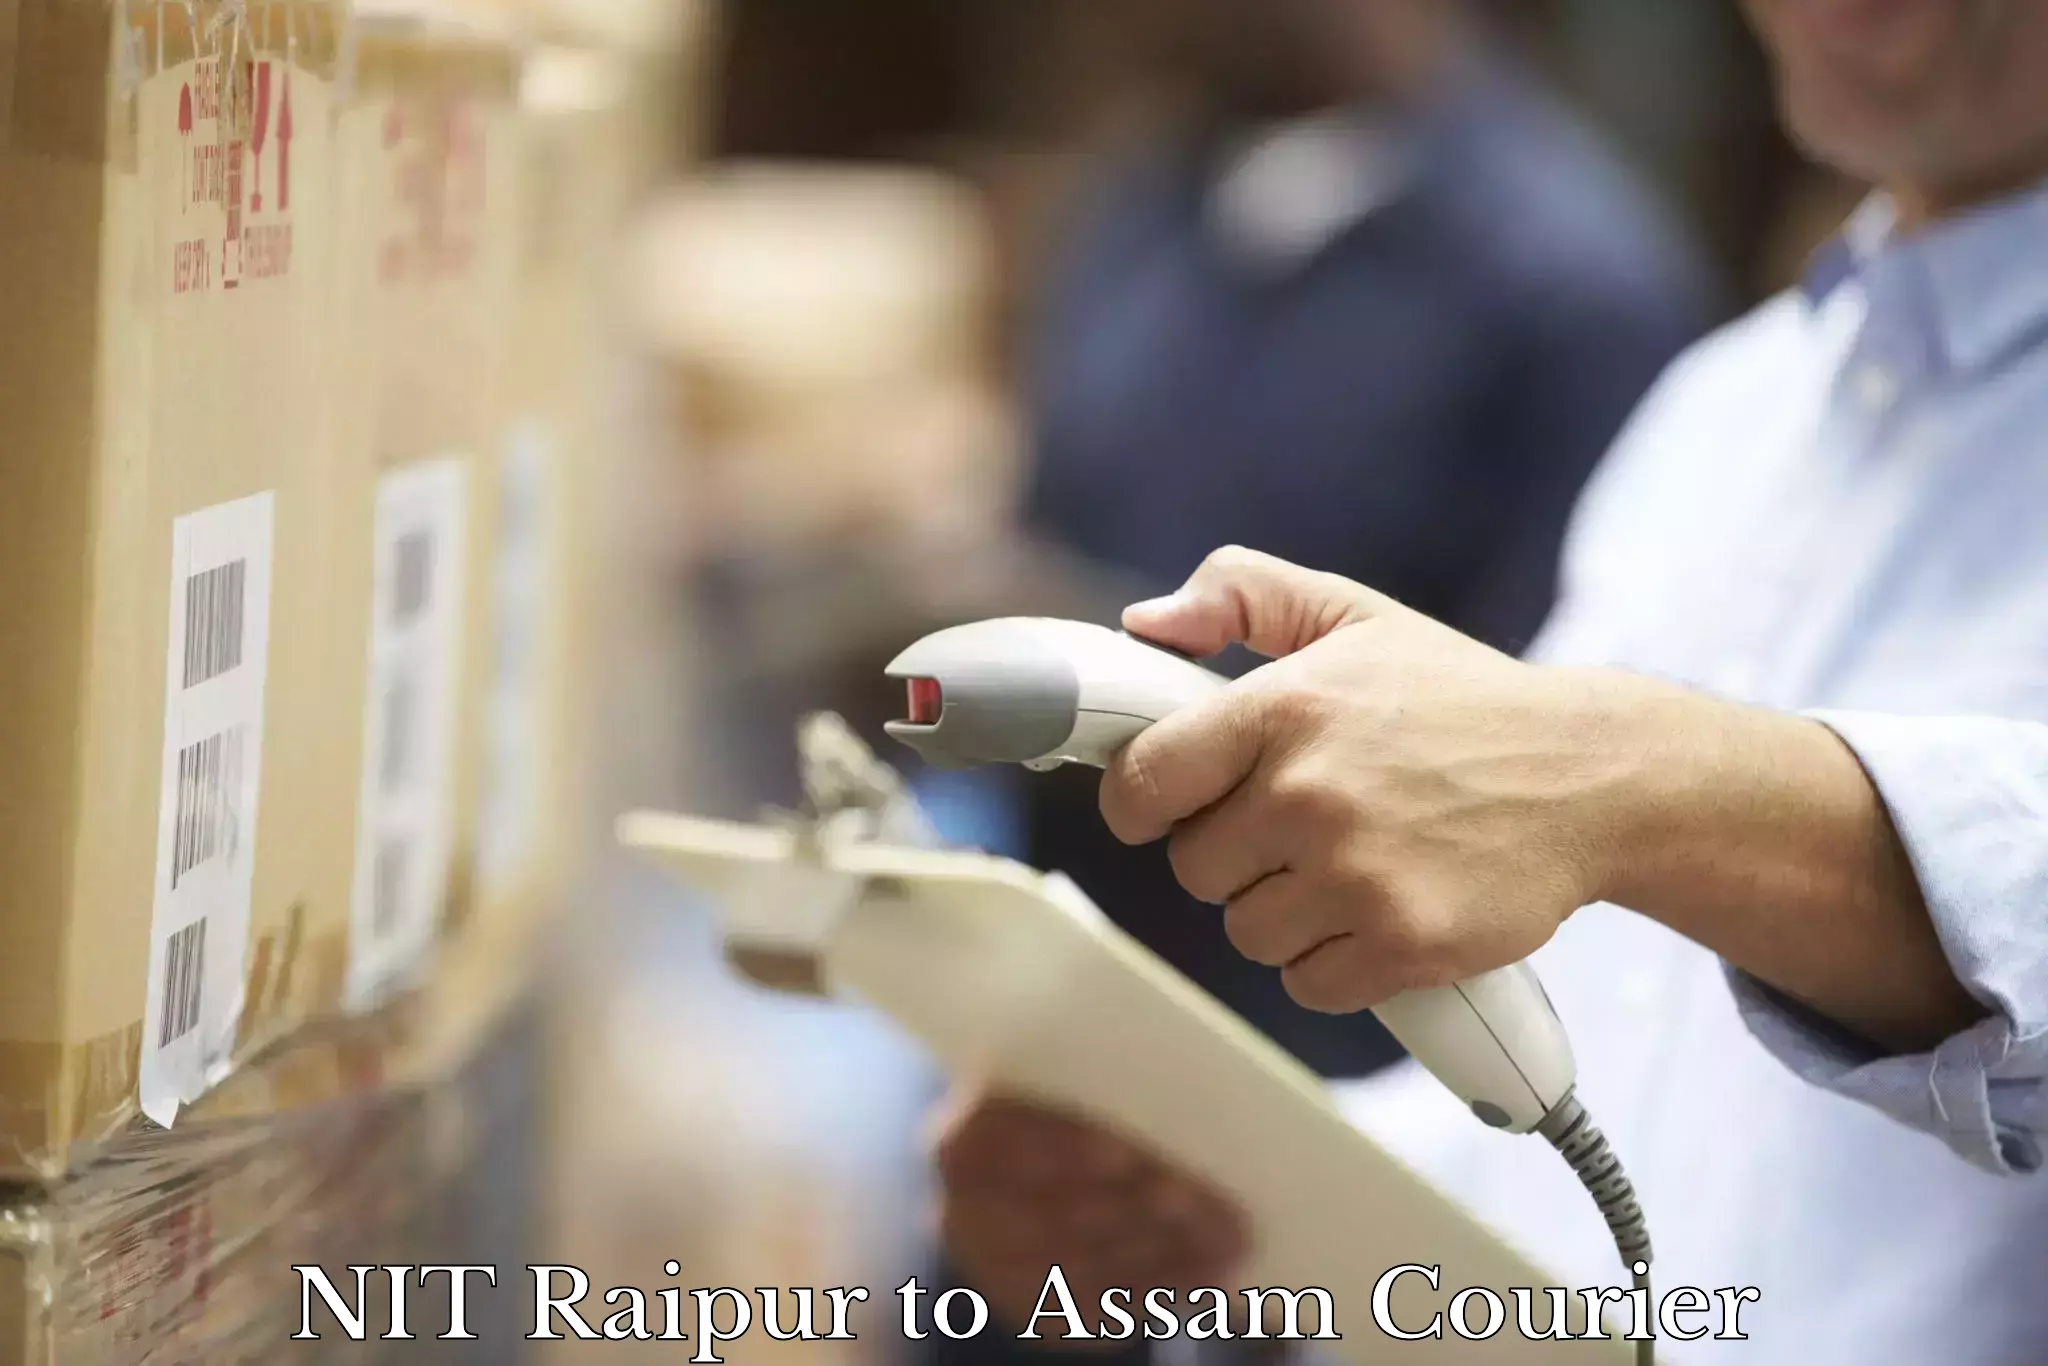 Cargo delivery service NIT Raipur to Assam